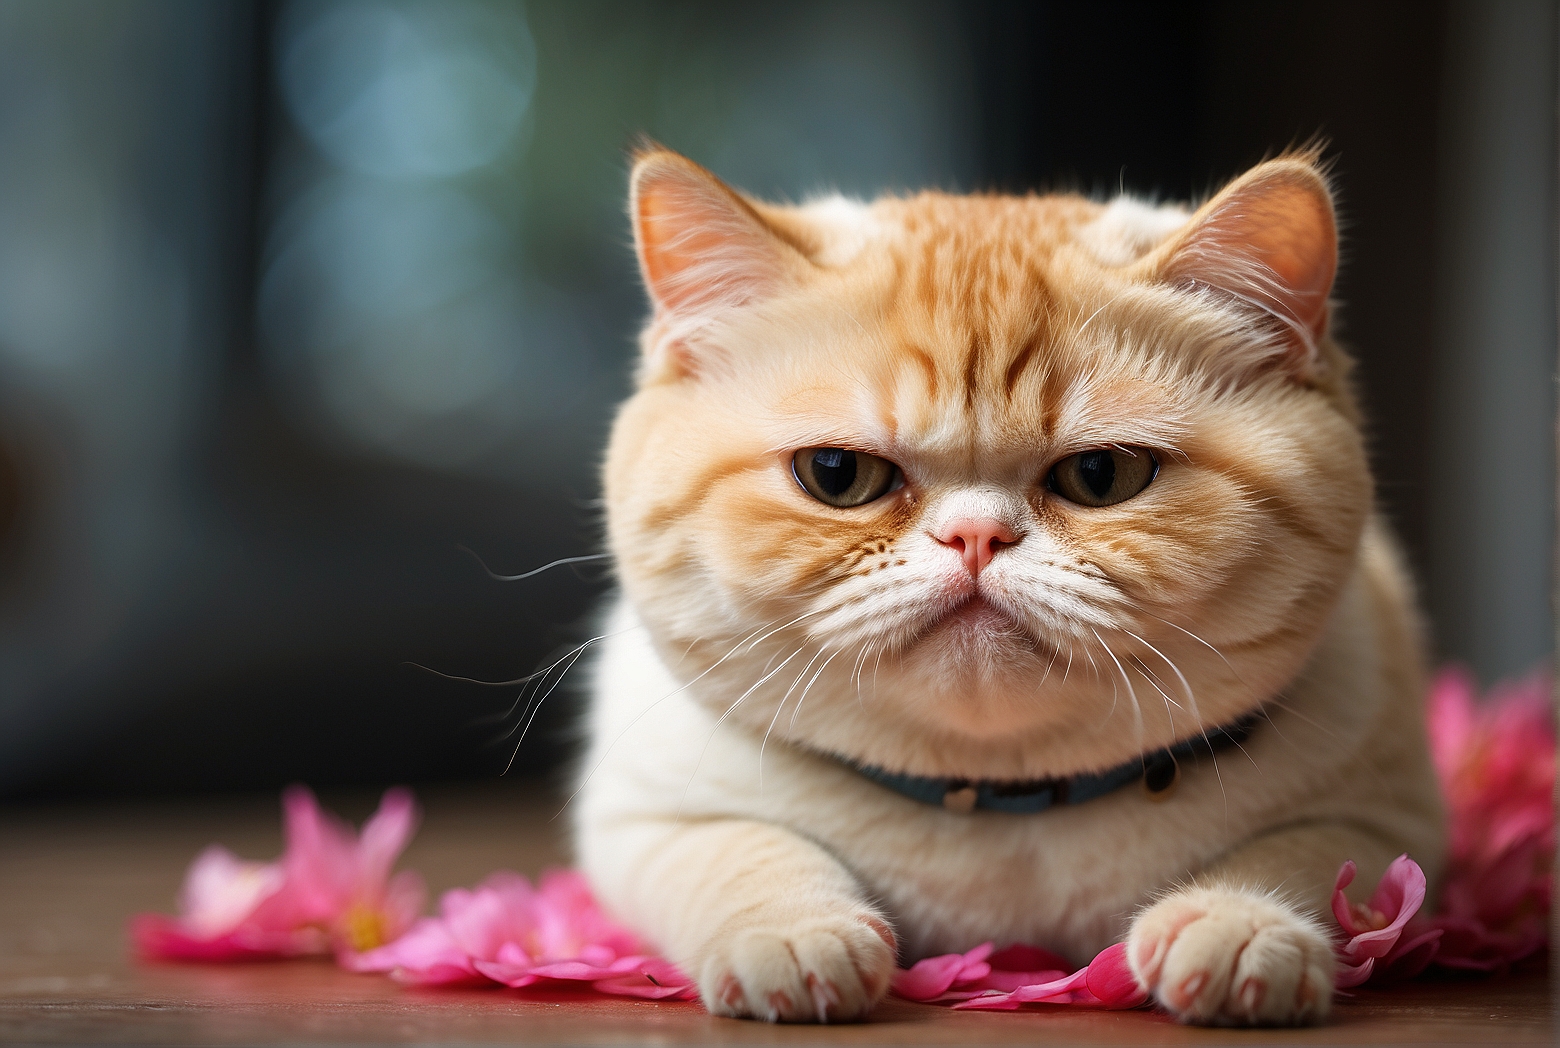 Why Do Exotic Shorthair Cats Sneeze So Much?